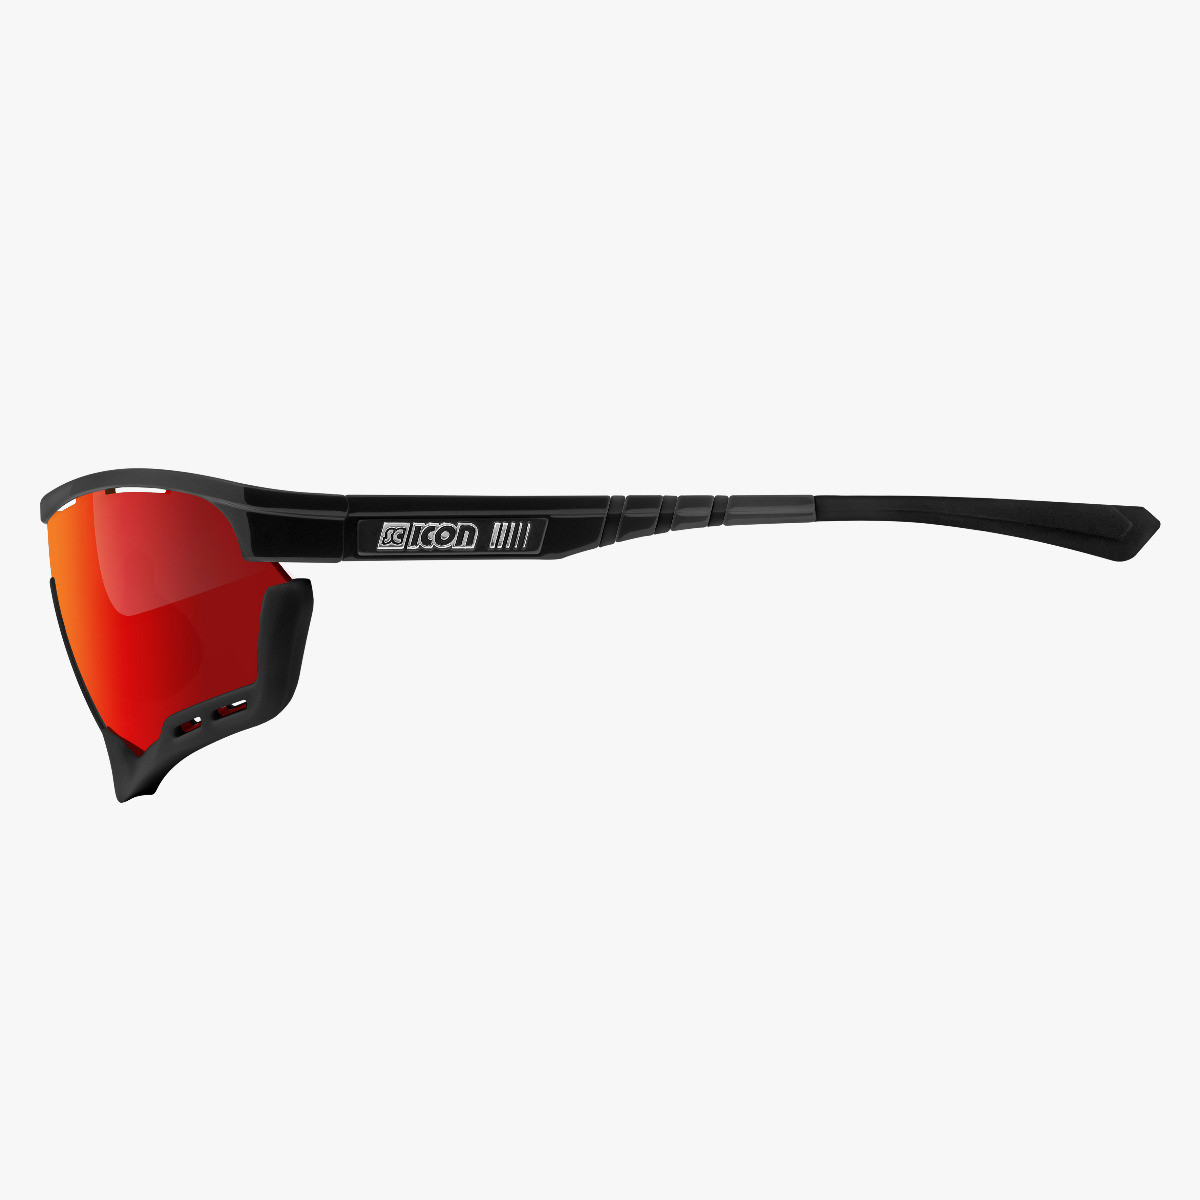 Scicon Sports | Aerotech Sport Cycling Performance Sunglasses - Black / Red - EY13060203